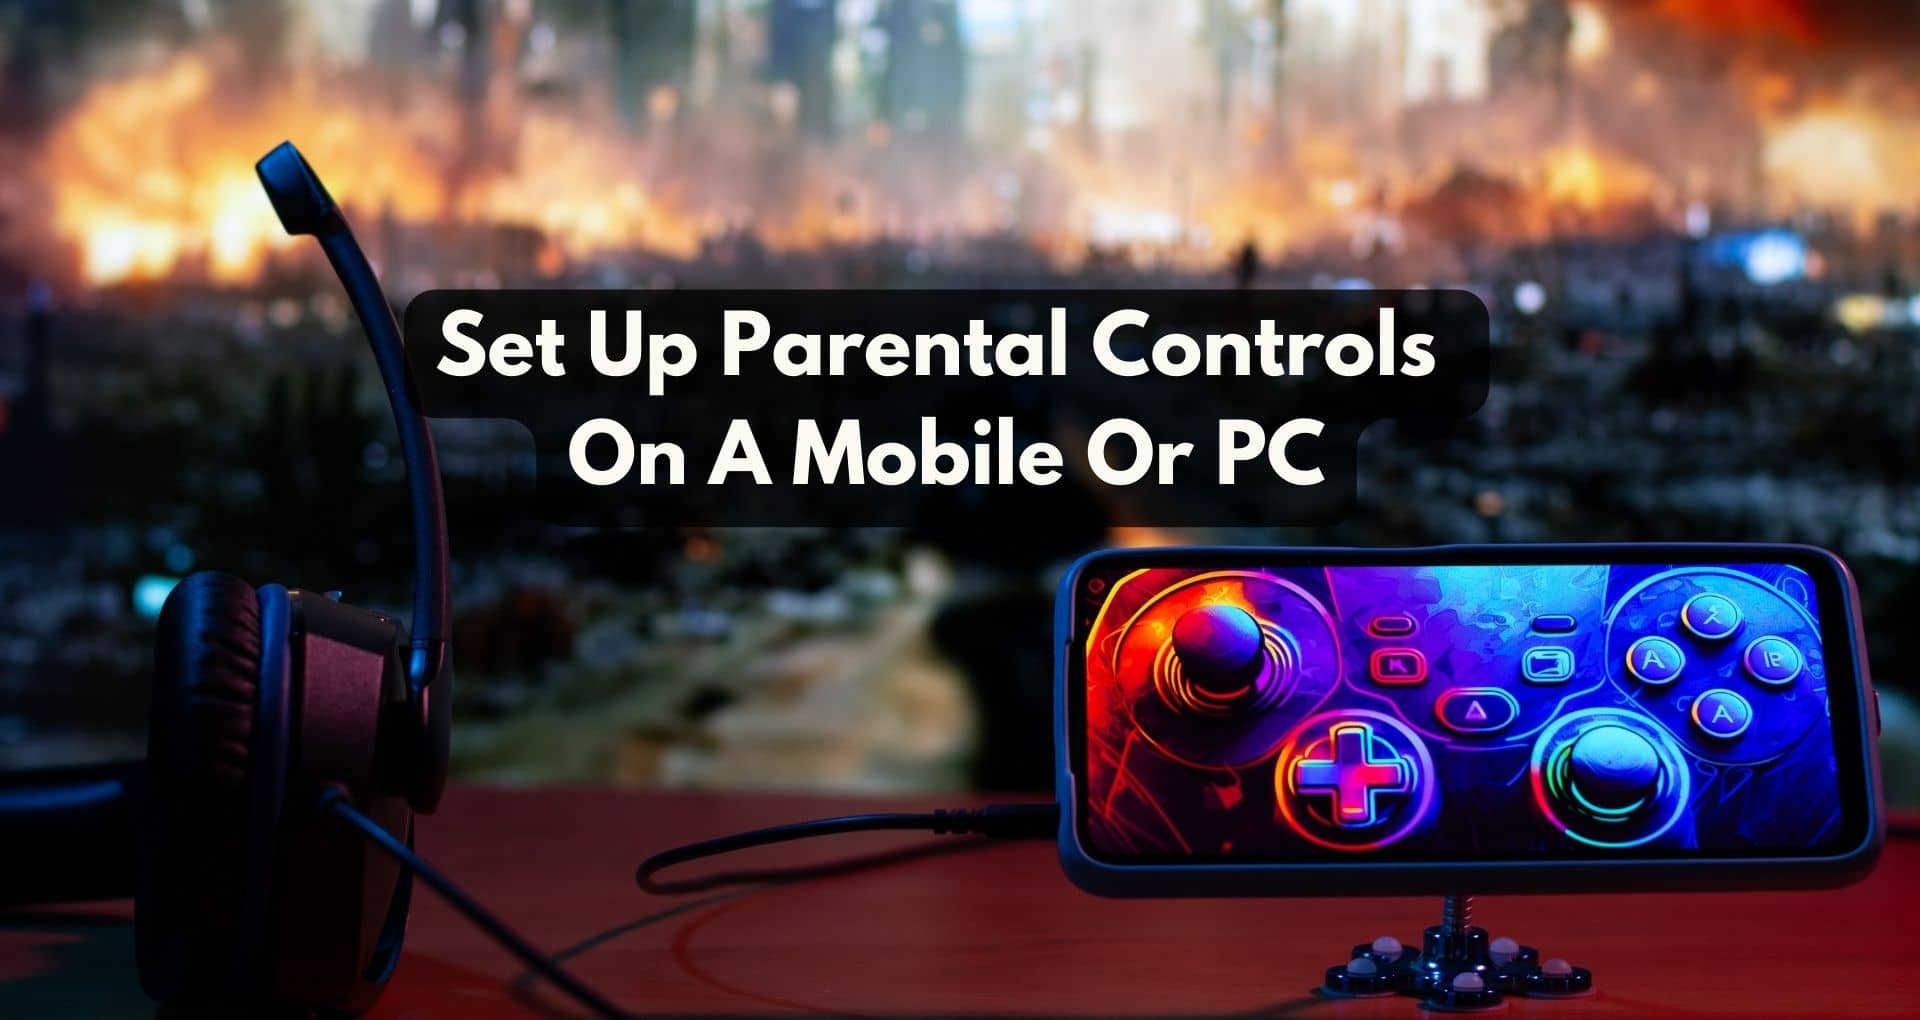 How To Set Up Parental Controls On A Mobile Or PC?